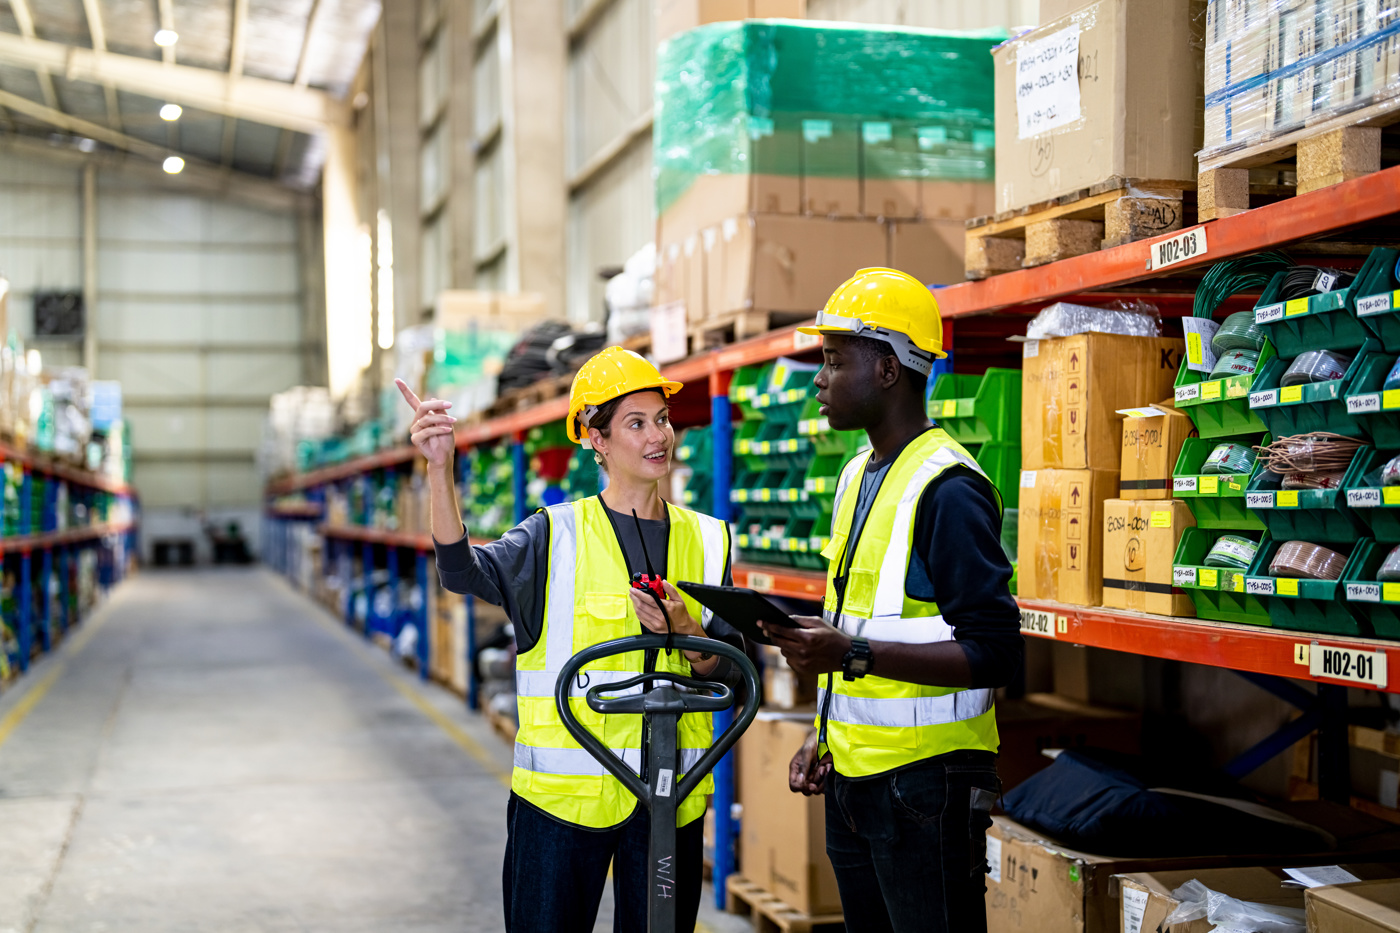 A supply chain manager with a federal diploma gives instructions to an employee.